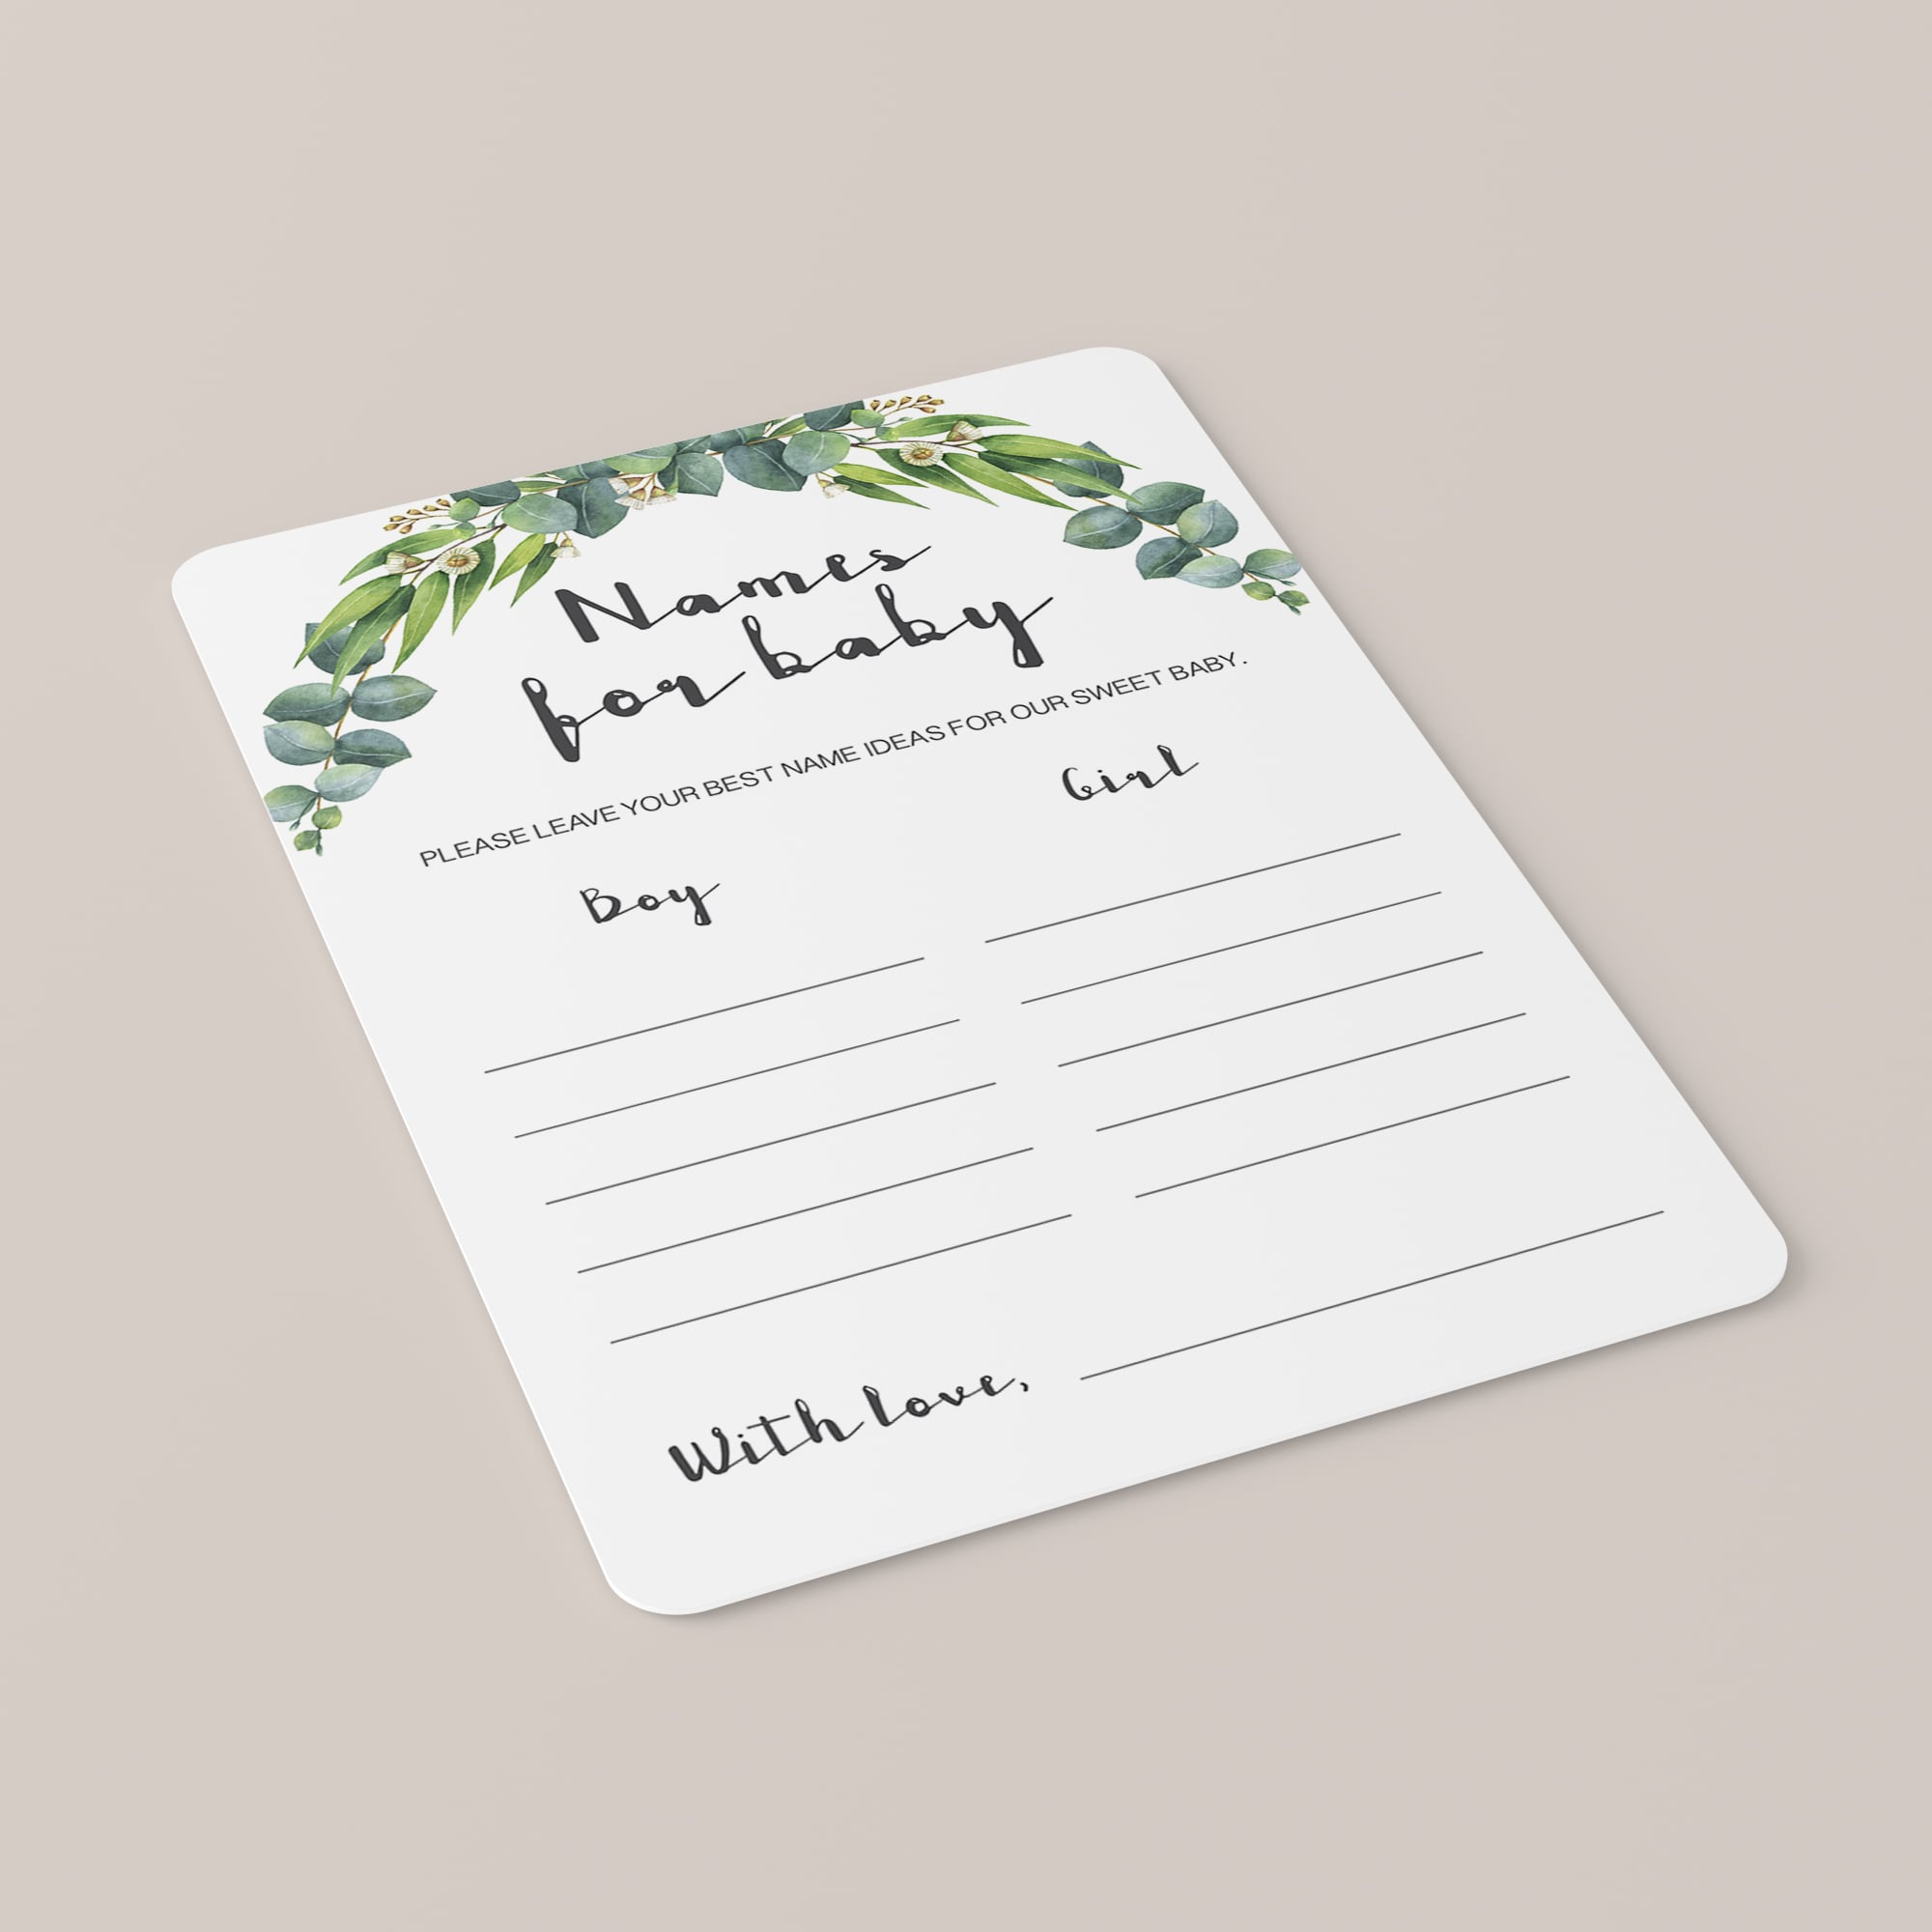 Name our sweet baby suggestion cards printable by LittleSizzle